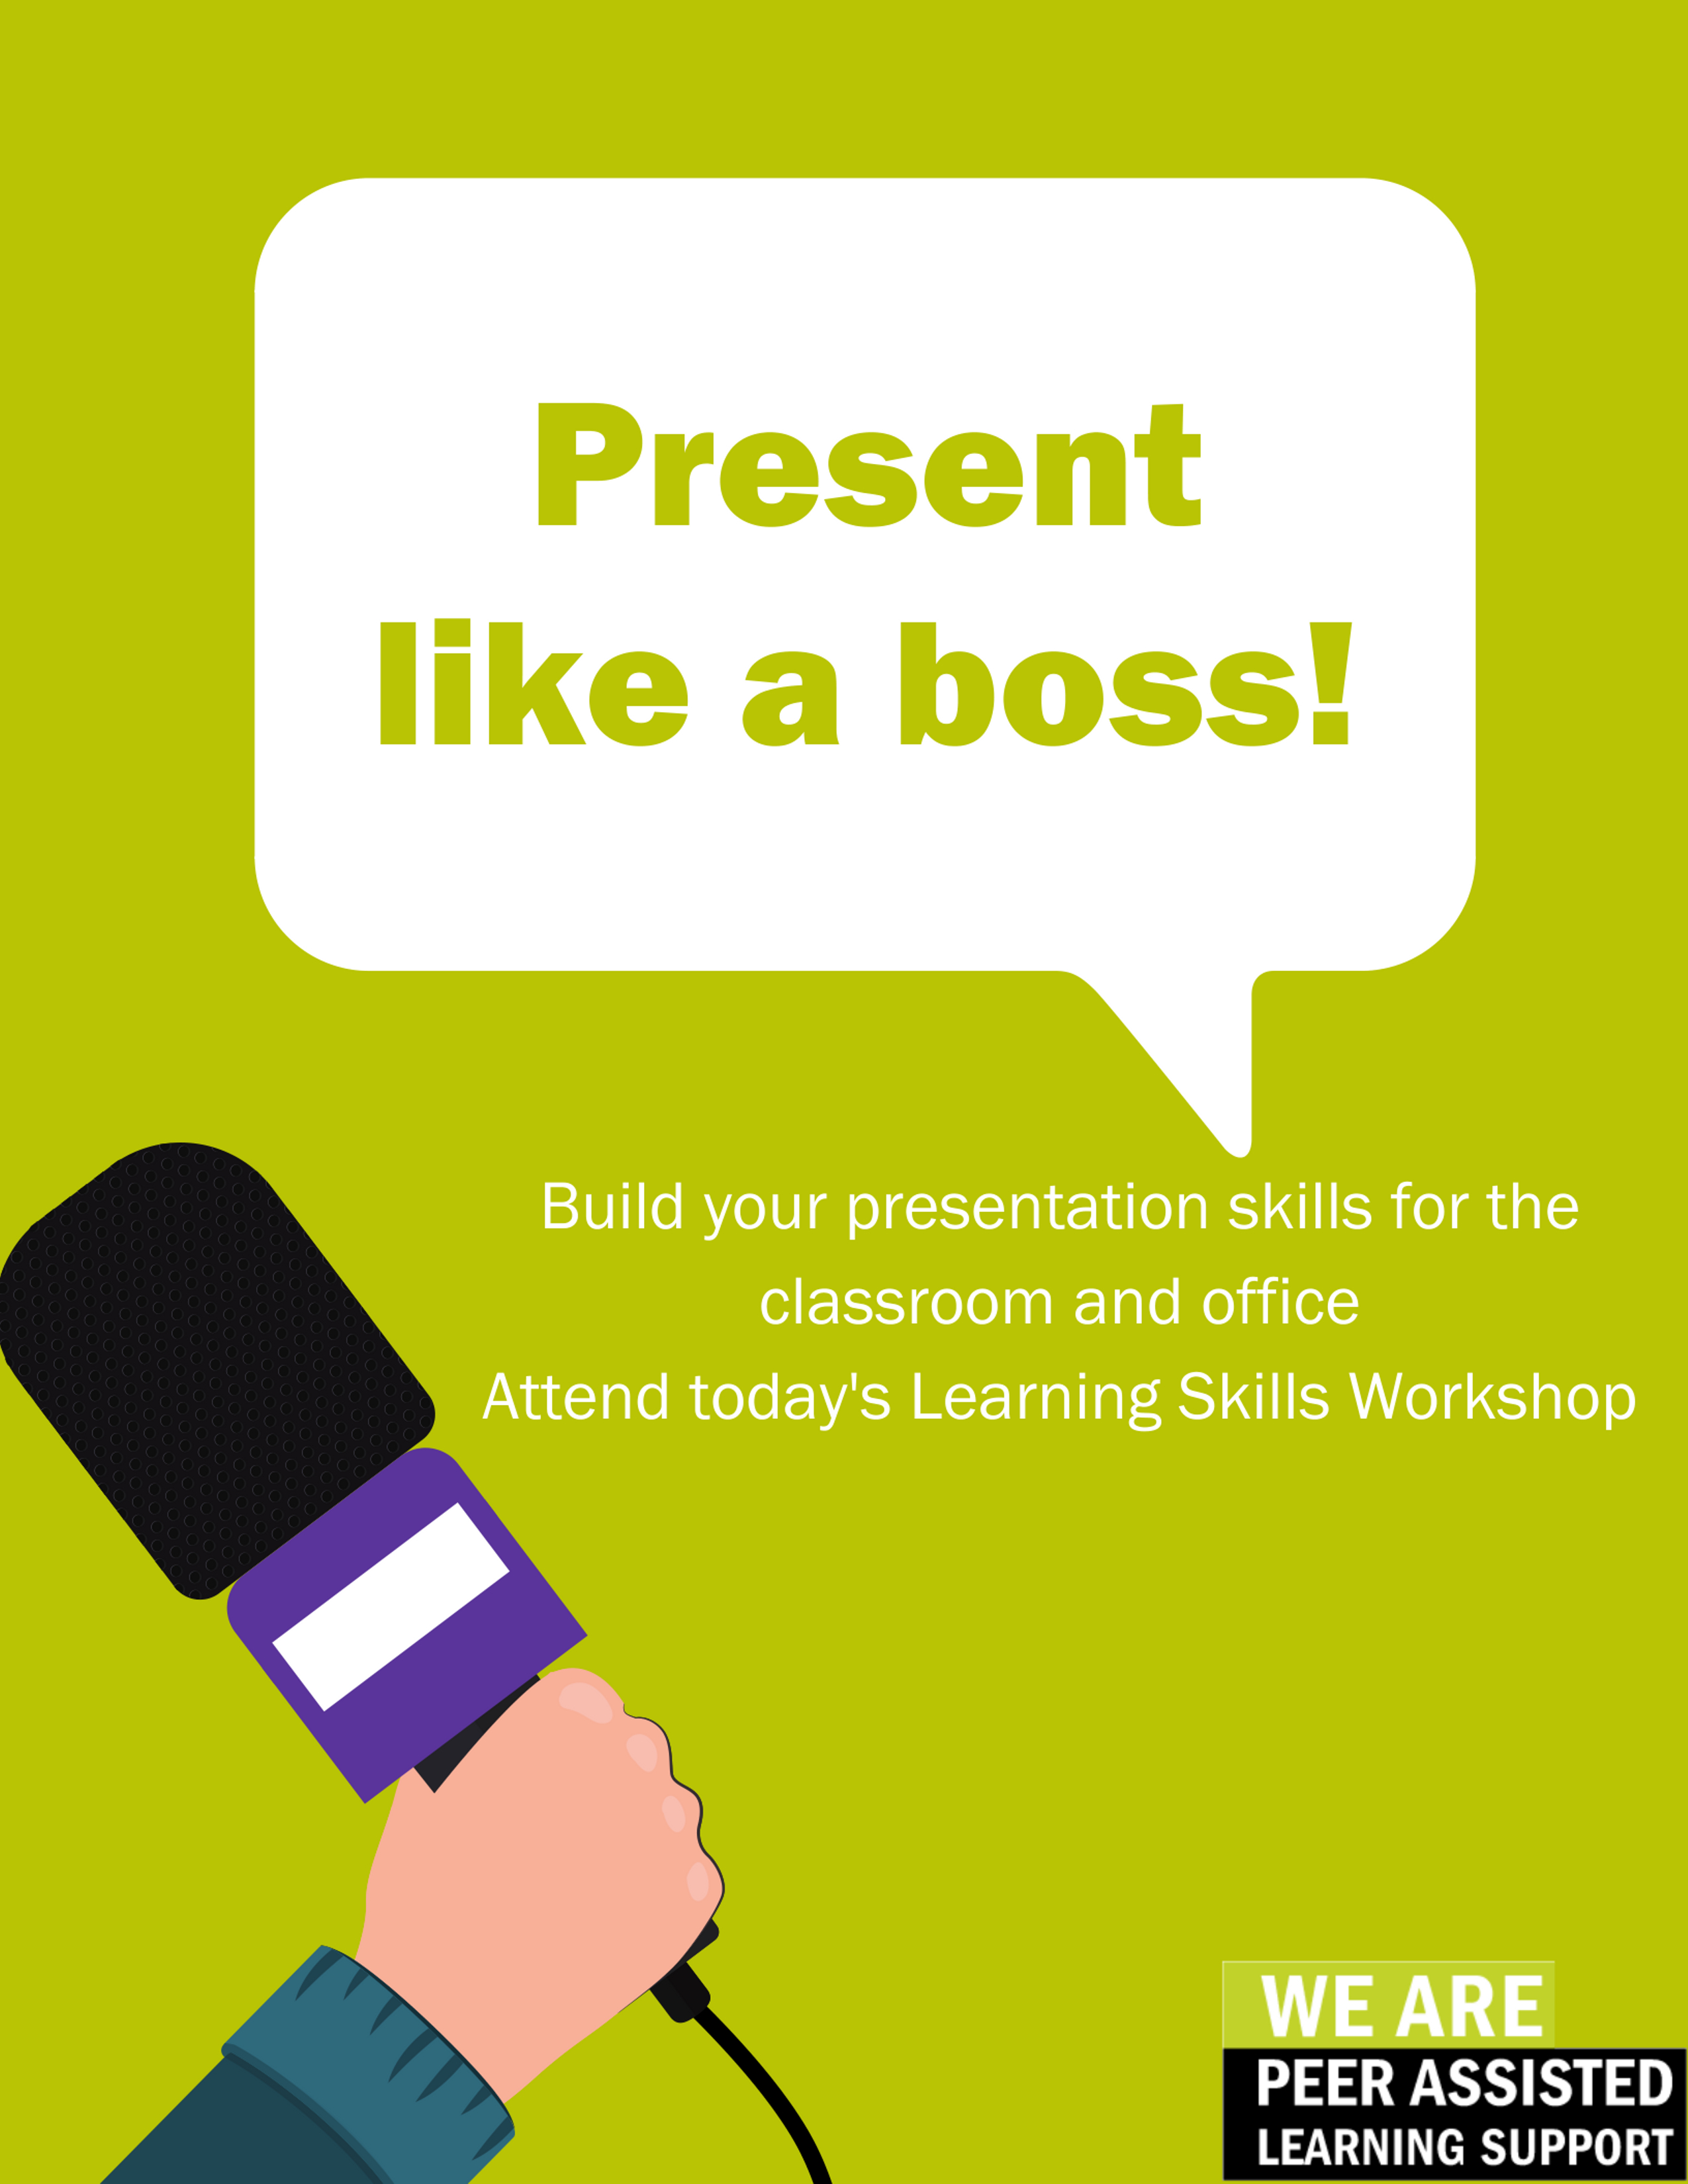 A hand holding a microphone on a bright green background. Background text says “Present like a boss! Build your presentation ski